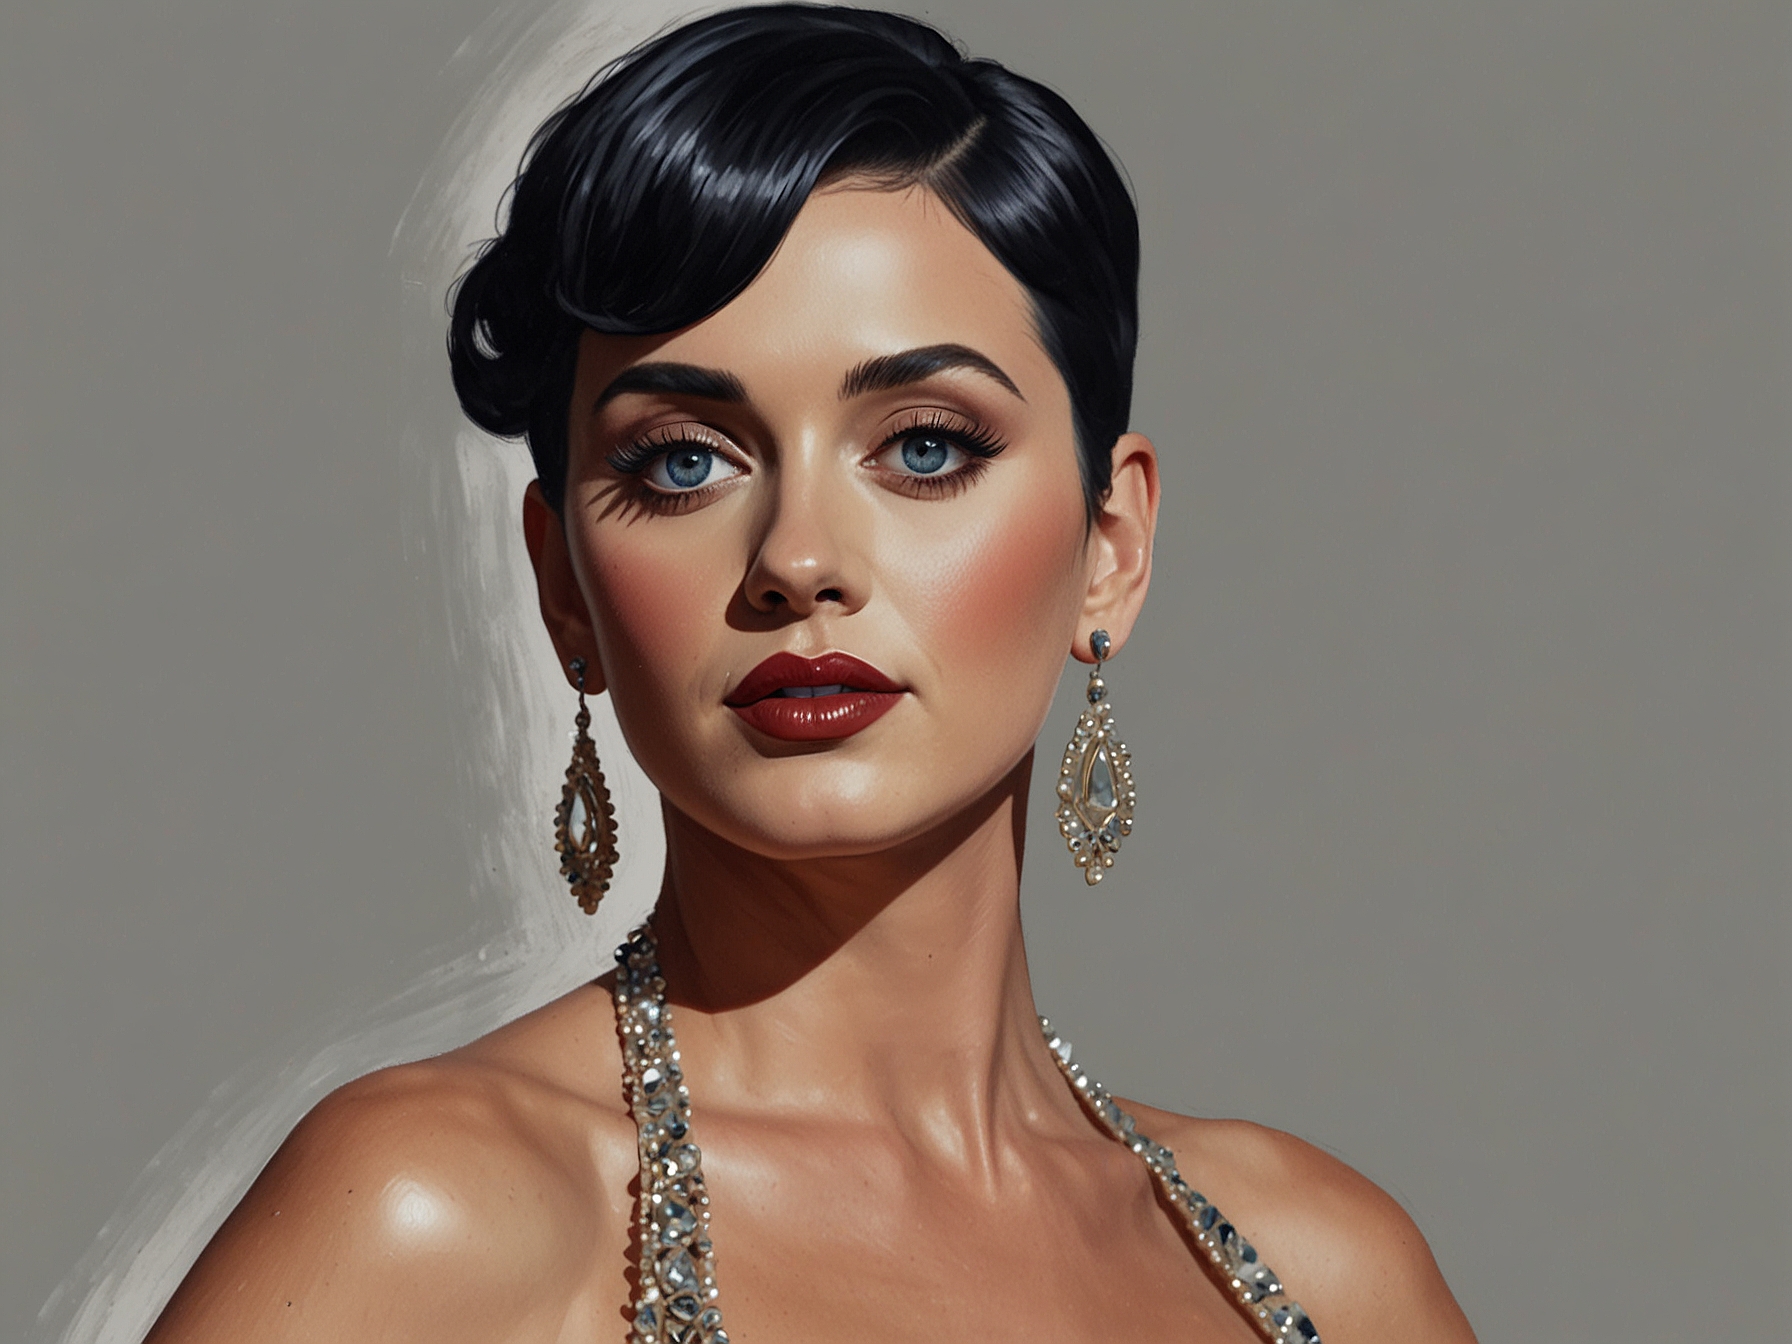 Katy Perry stuns in a glamorous, glittering low-cut gown, exuding confidence and charm. The photo captures her in a bold, striking pose, showcasing her effortless elegance and vibrant style.